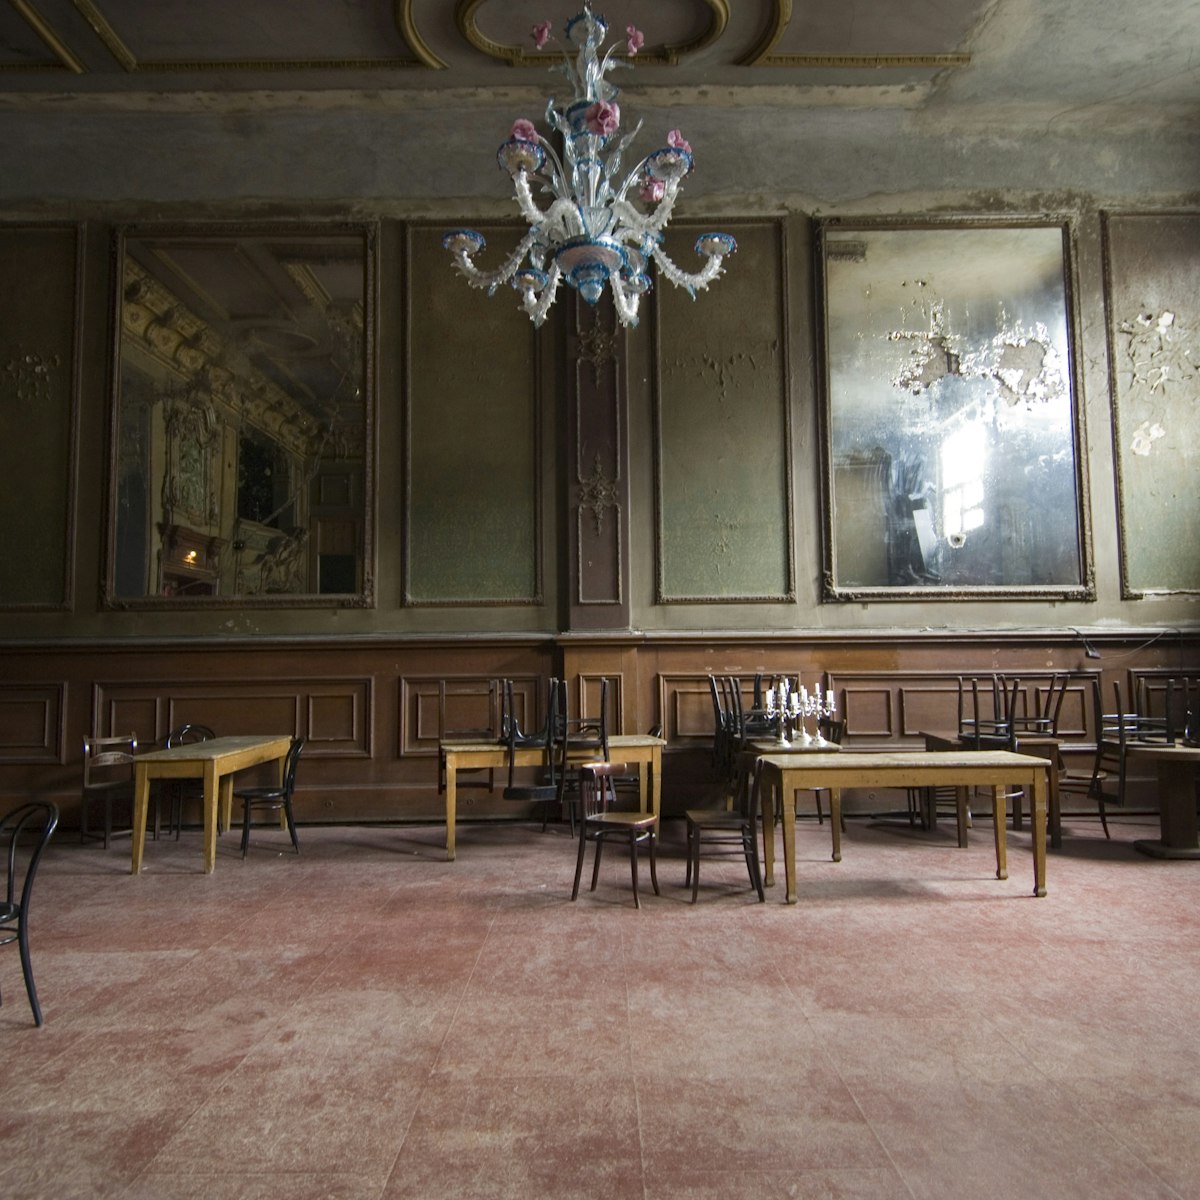 Germany, Berlin, Clarchen's Ballhaus, old beer hall